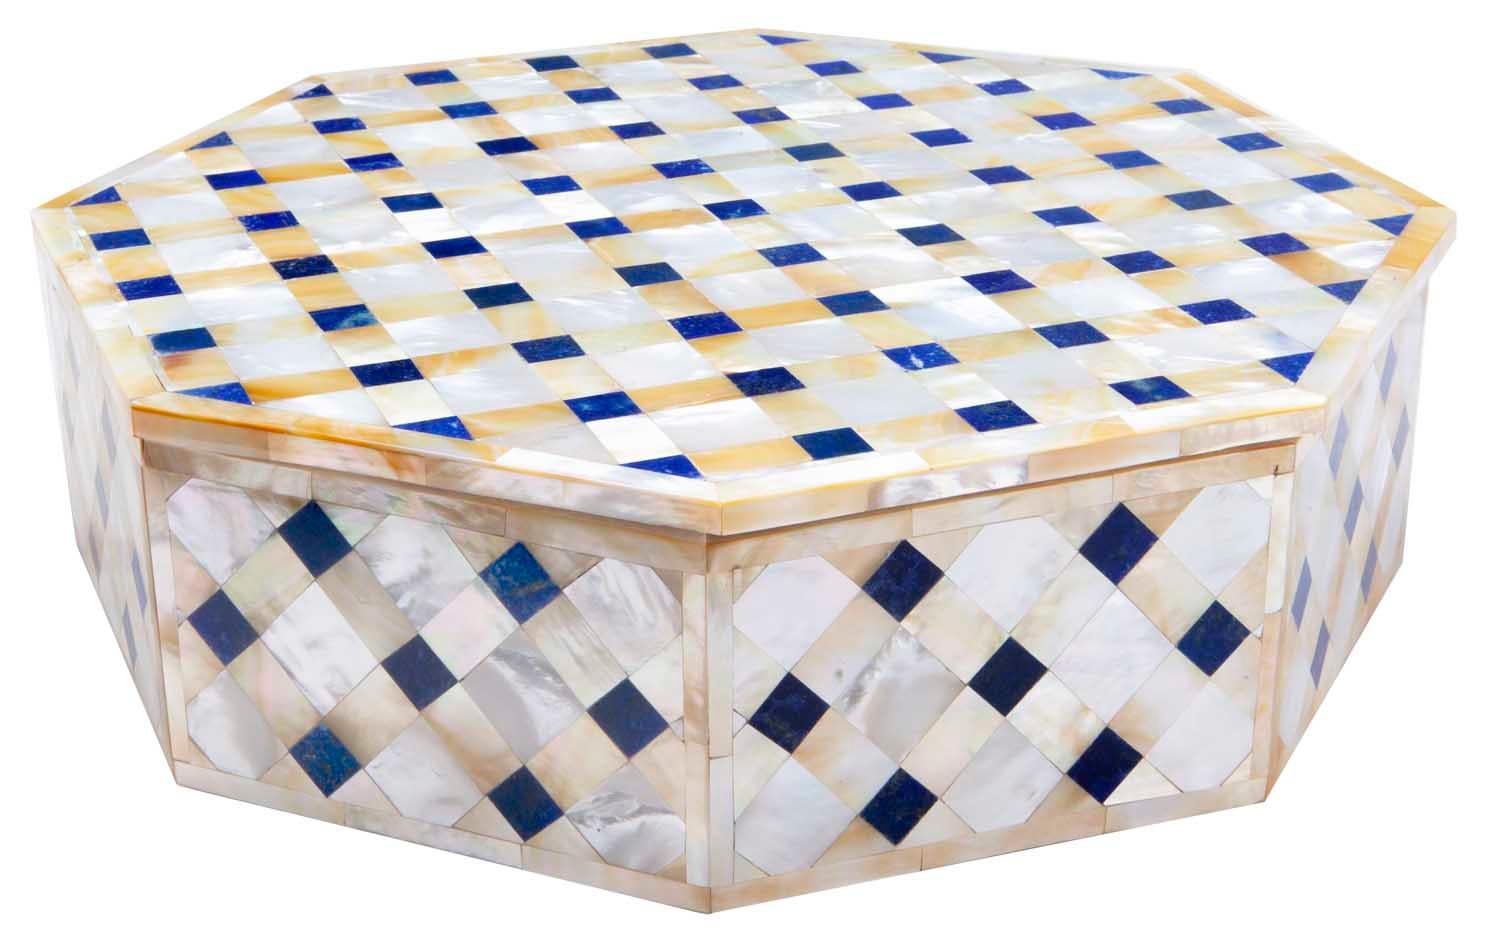 This fabulous octagonal box carved from Makrana marble. Once used for the Taj Mahal, it is known to be the most dense marble in the world. Inlaid Abalone and Lapis Lazuli adorn this exquisite box with a satin weave pattern. The interior is lined